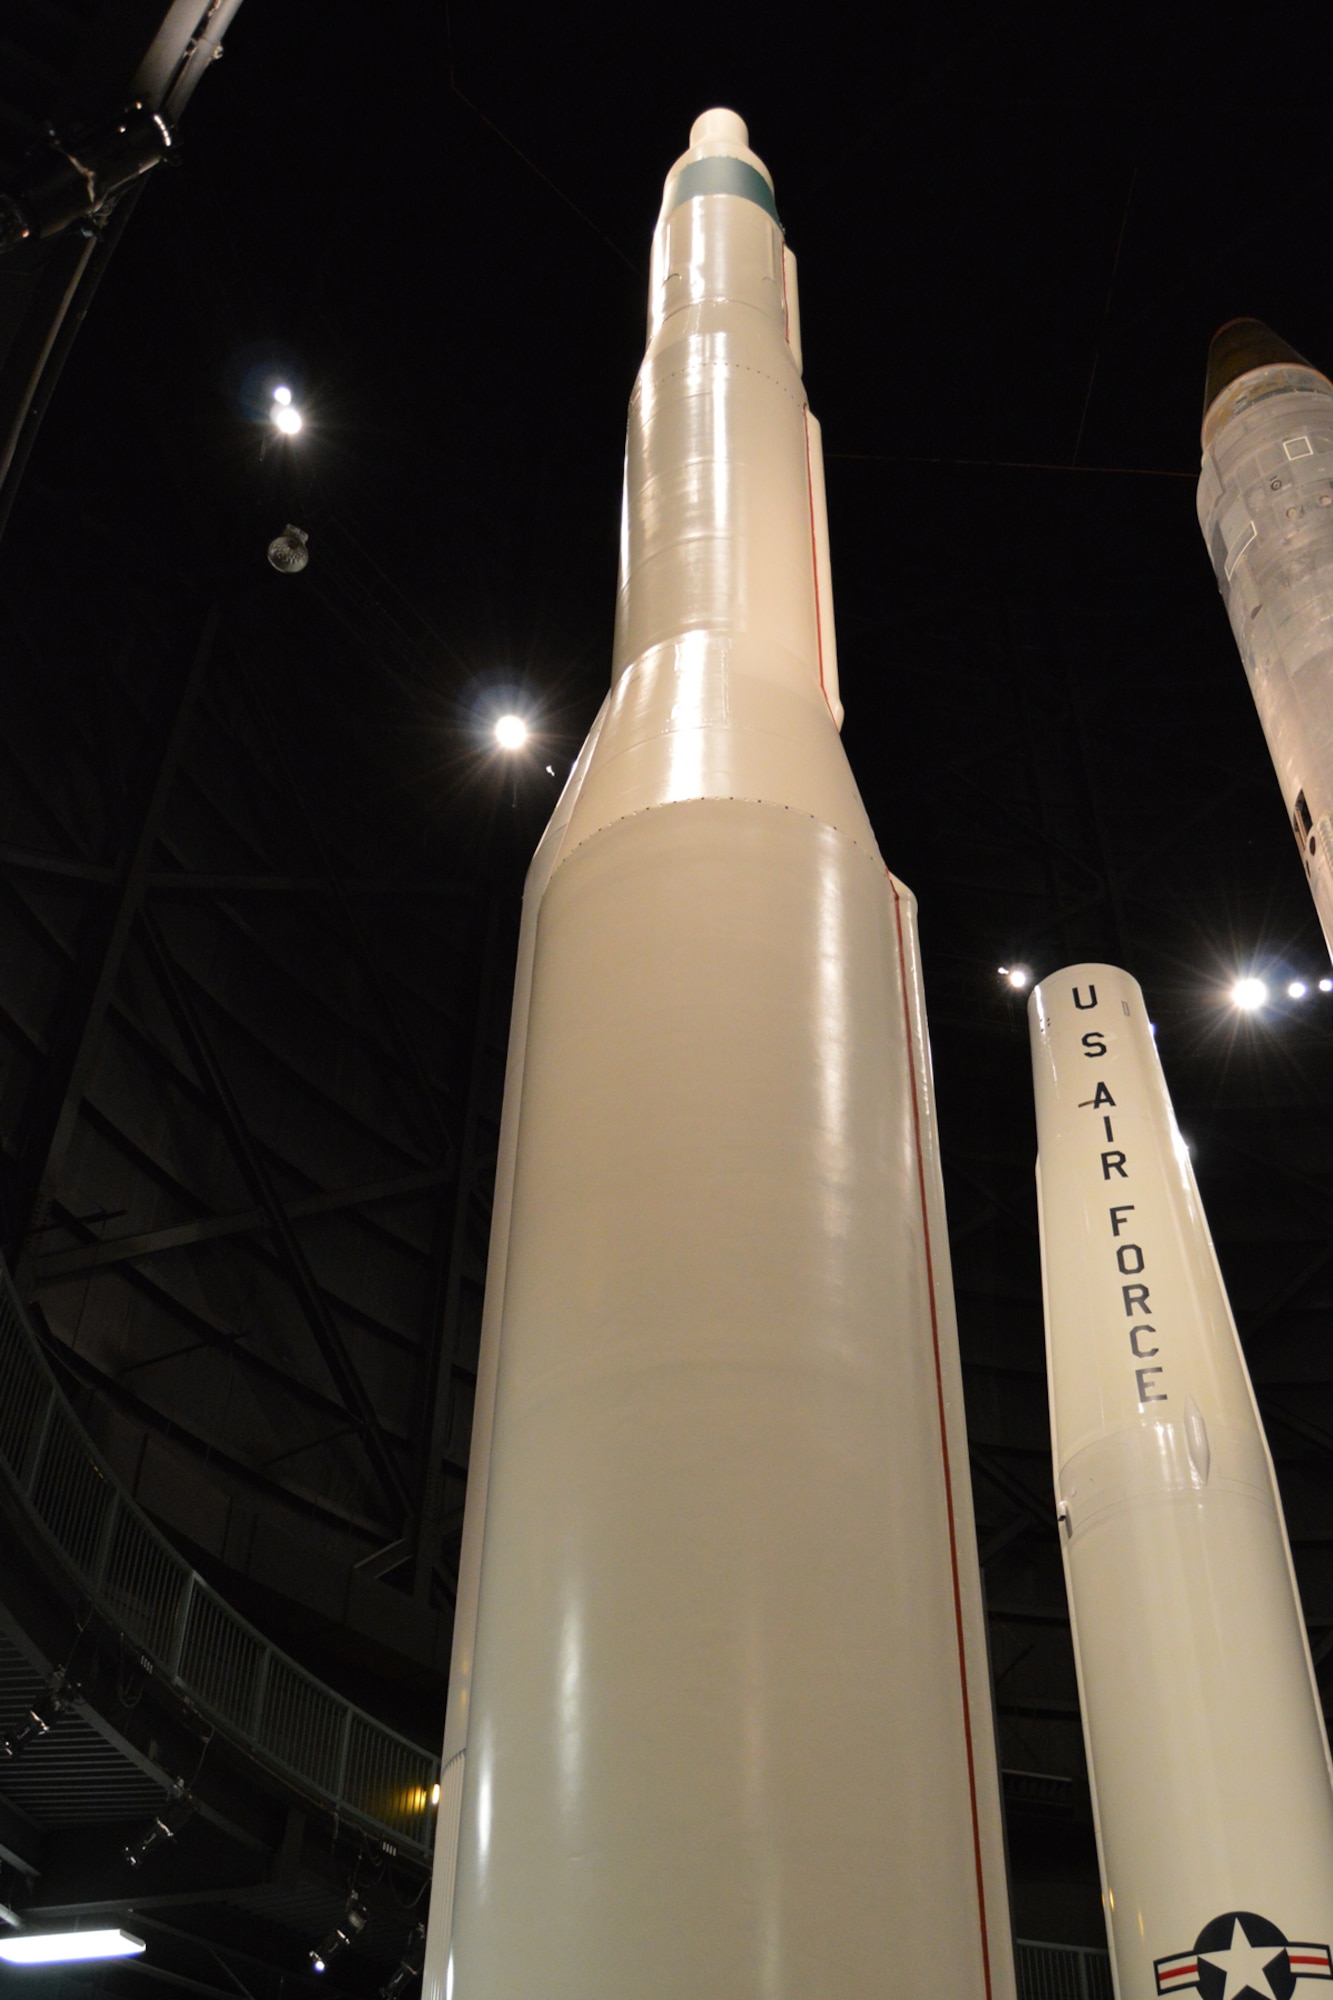 DAYTON, Ohio (03/2011) -- The Minuteman IA missile in the Missile & Space Gallery at the National Museum of the U.S. Air Force. (U.S. Air Force photo)
